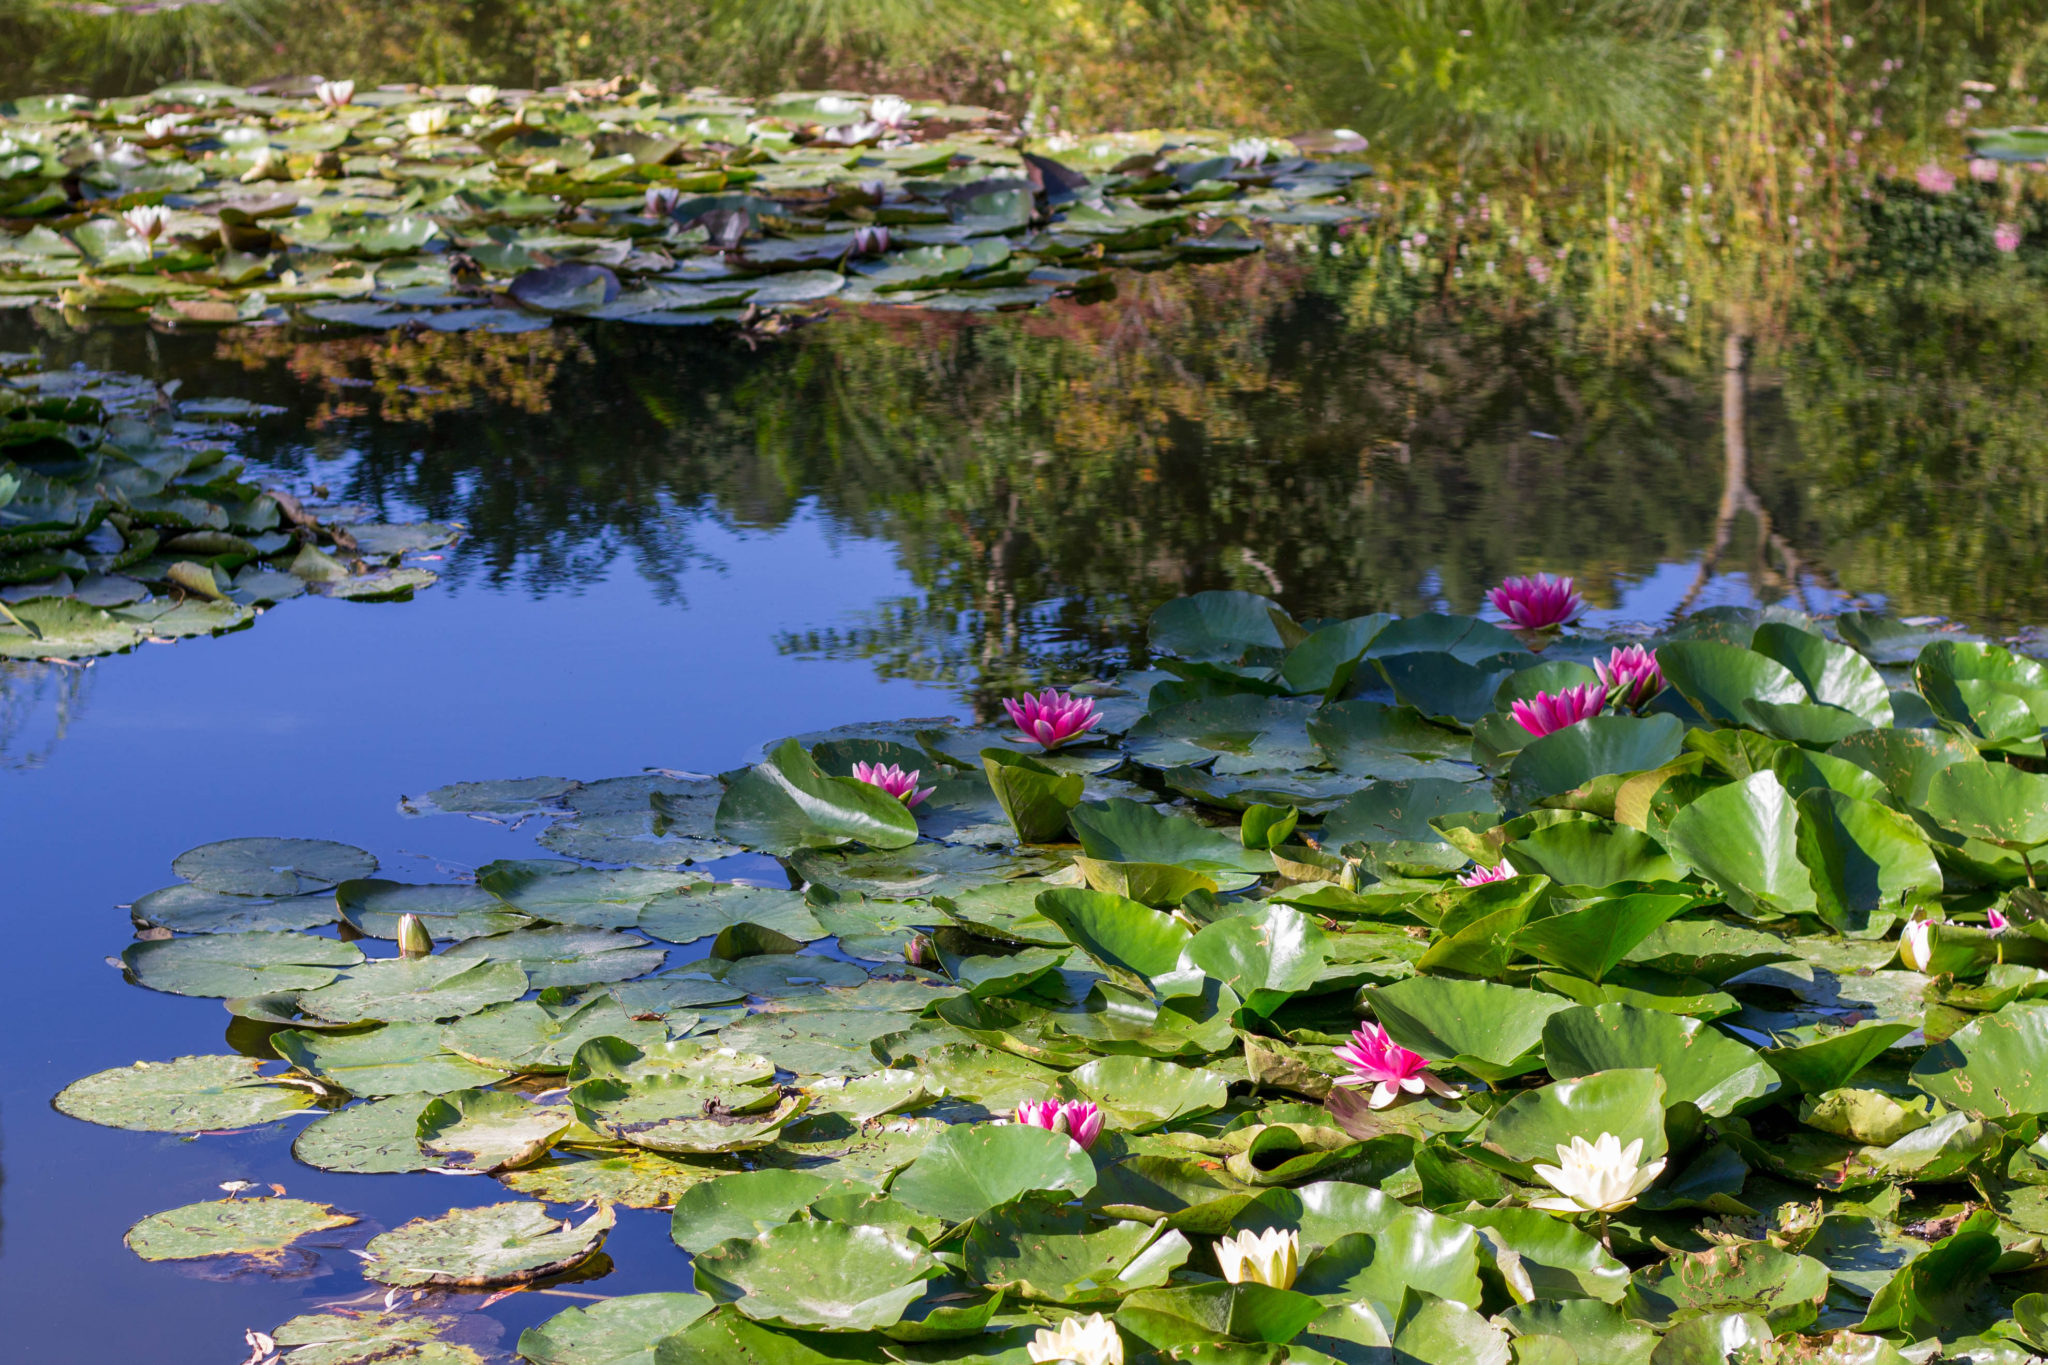 Pink and white waterlilies in Monet's Water garden at Giverny. Visiting Giverny is a special experience and is not to be missed in any season. Giverny is the perfect day trip from Paris